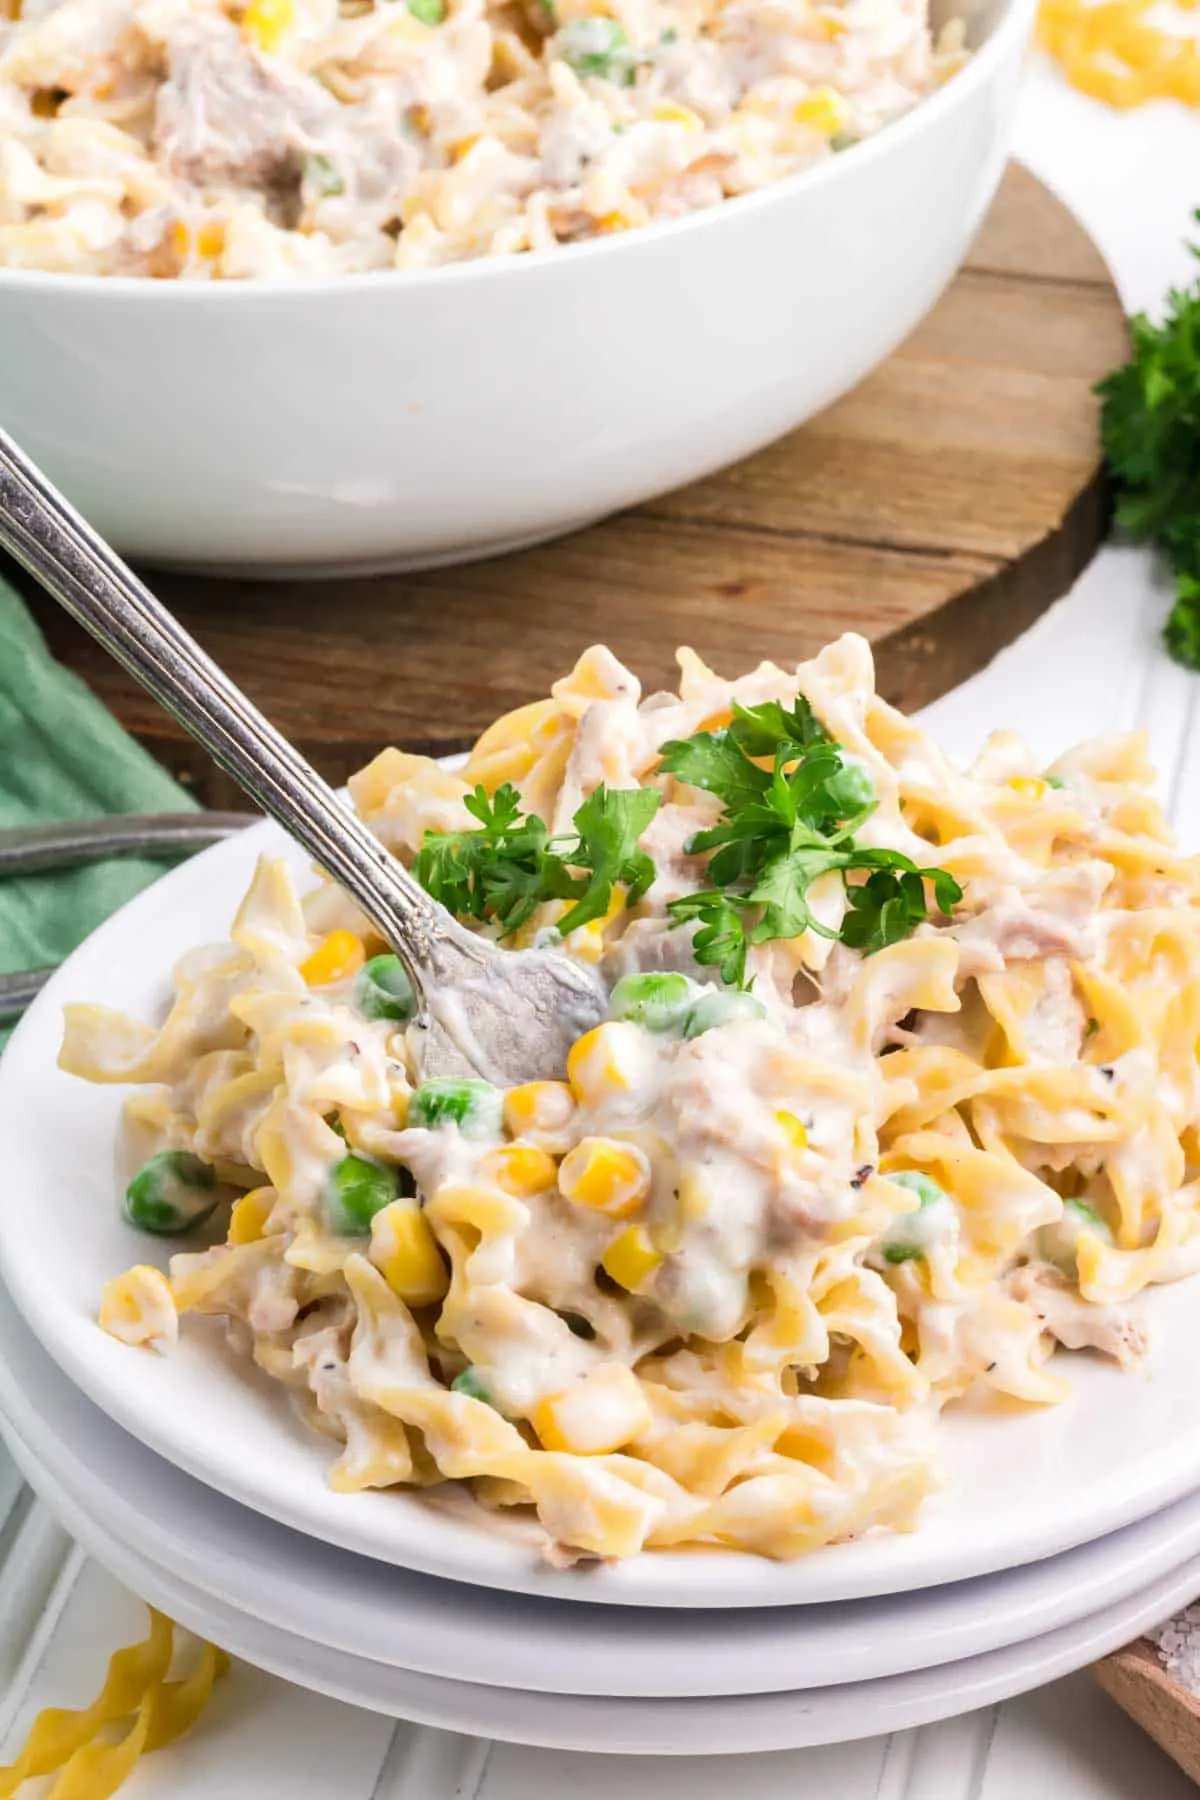 Homemade Tuna Helper is a delicious twist on boxed tuna helper loaded with egg noodles, green peas, corn, cream cheese, parmesan cheese and tuna all in a creamy sauce.